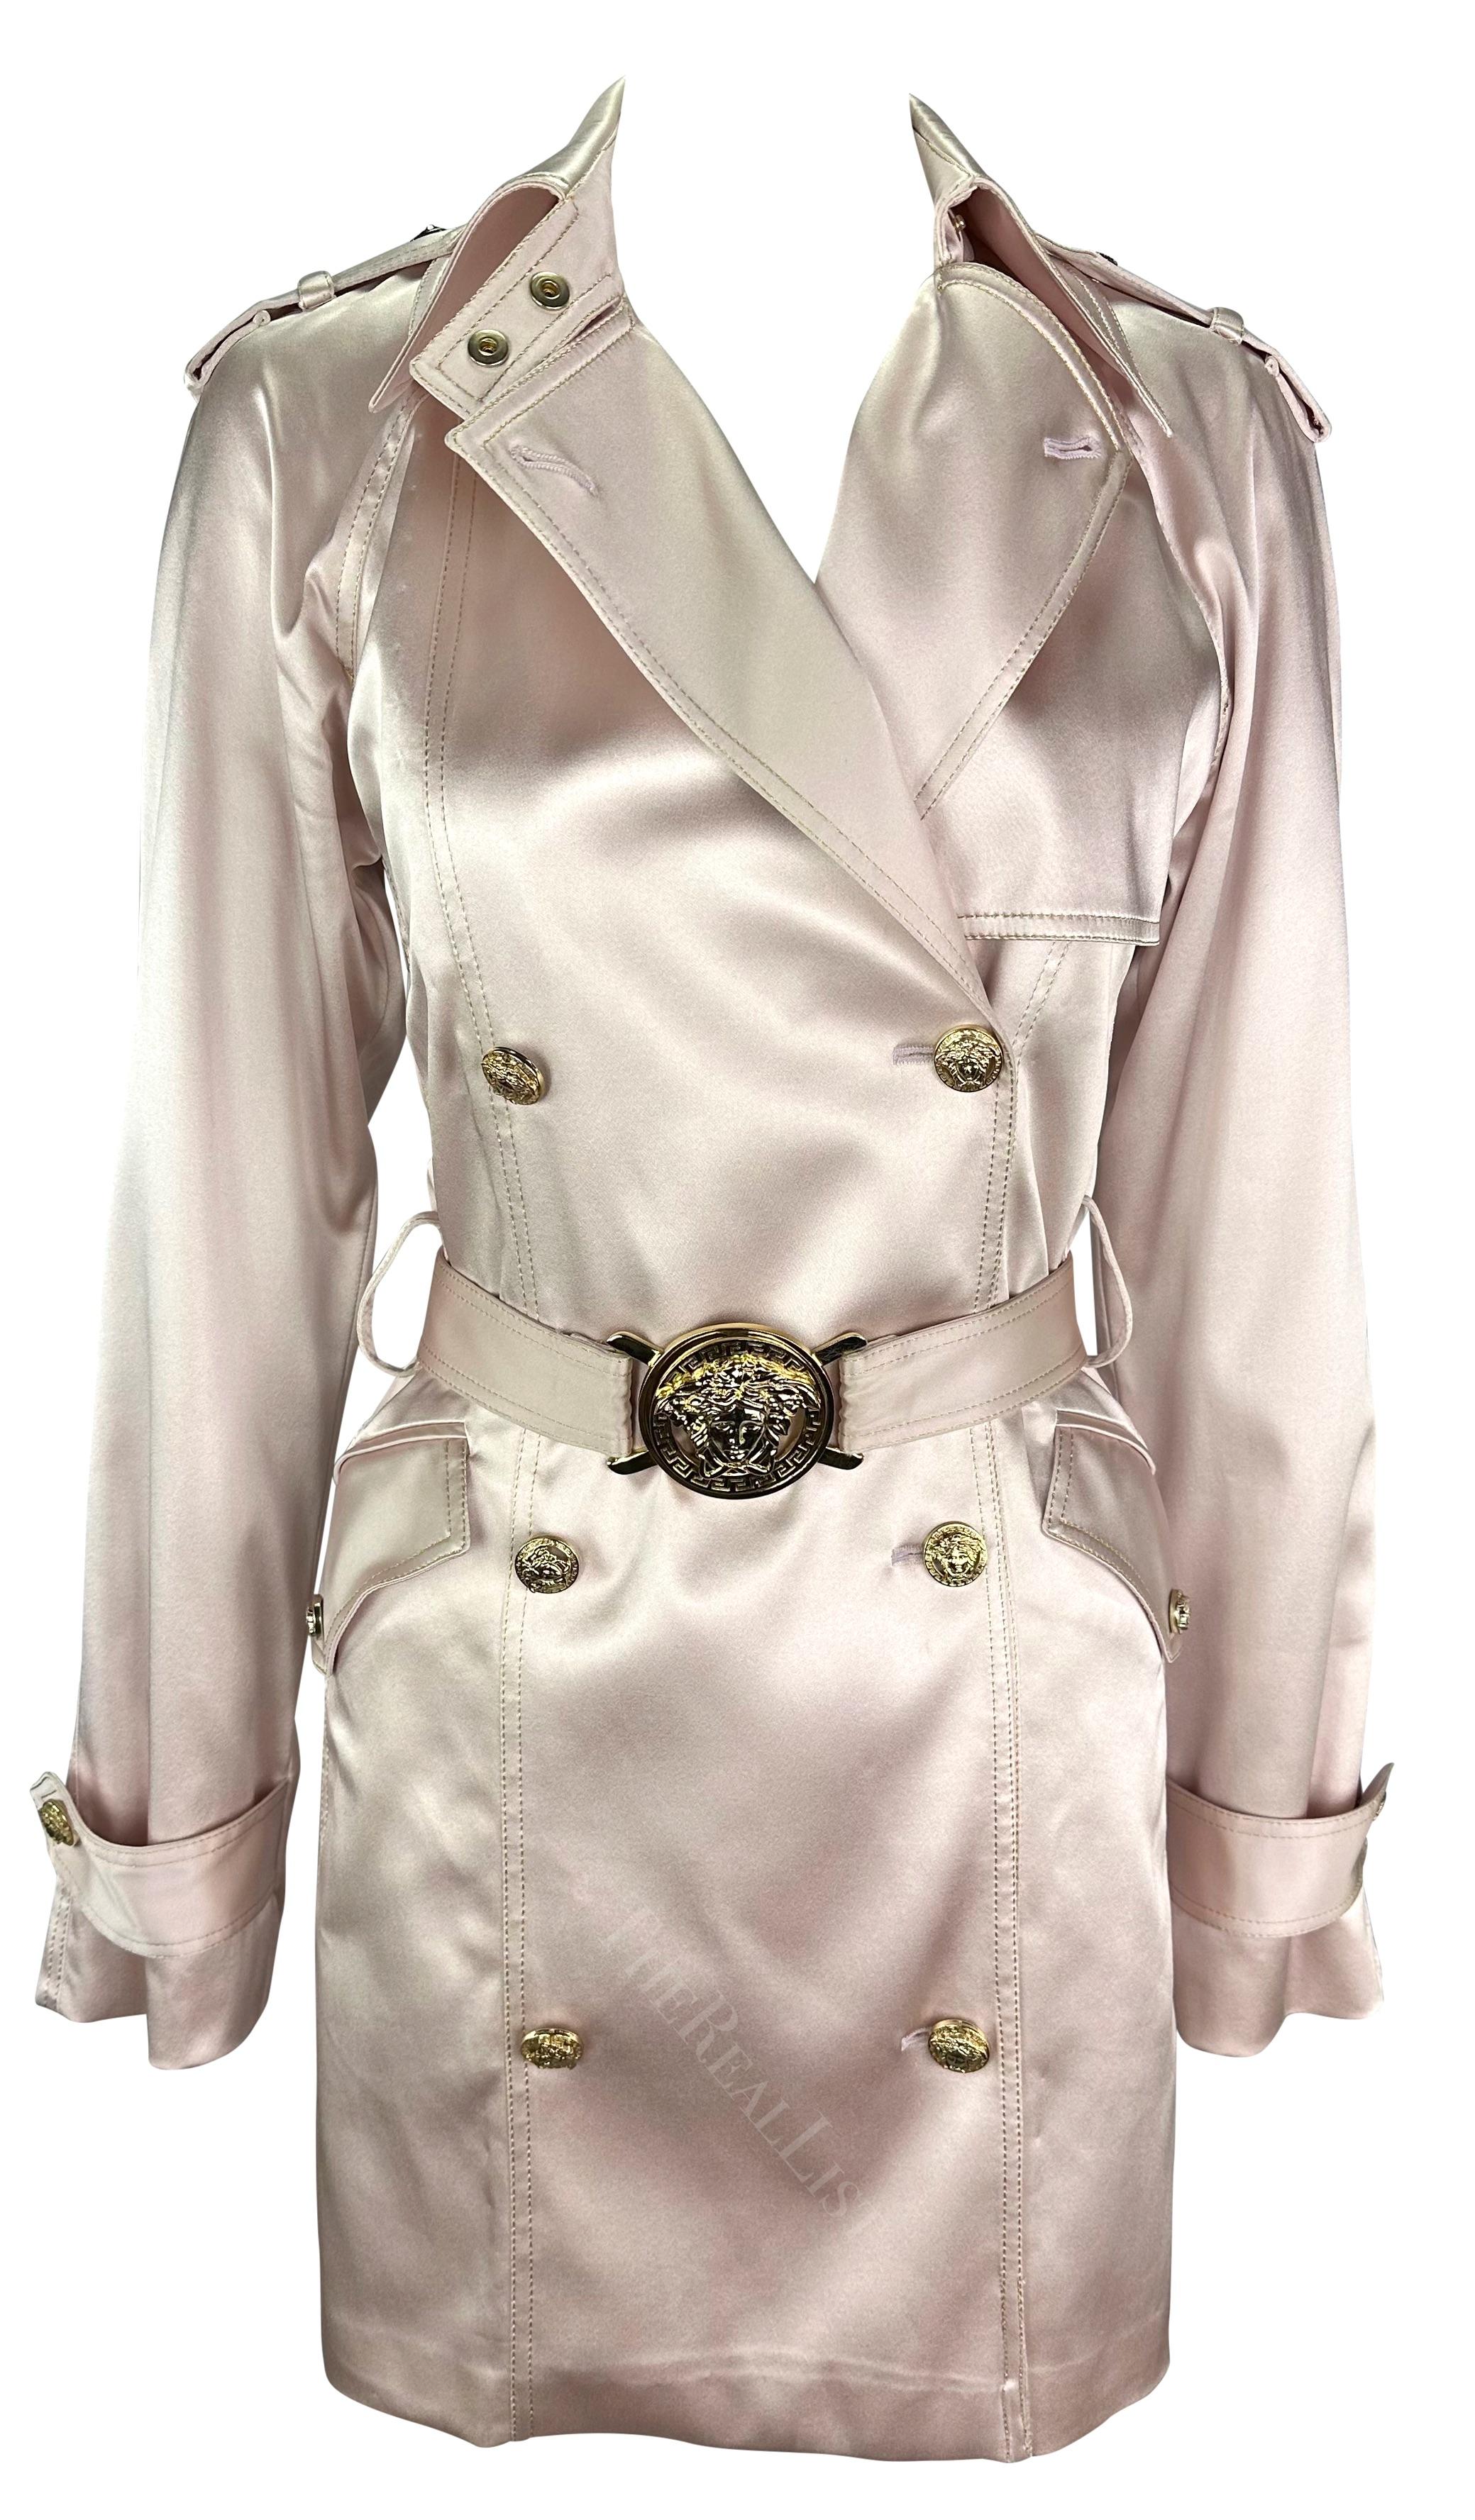 Presenting a light pink satin Versace double-breasted prototype coat, designed by Donatella Versace. From the Spring/Summer 2005 collection, this exceptional coat takes center stage with its lustrous light pink satin construction. A statement-making